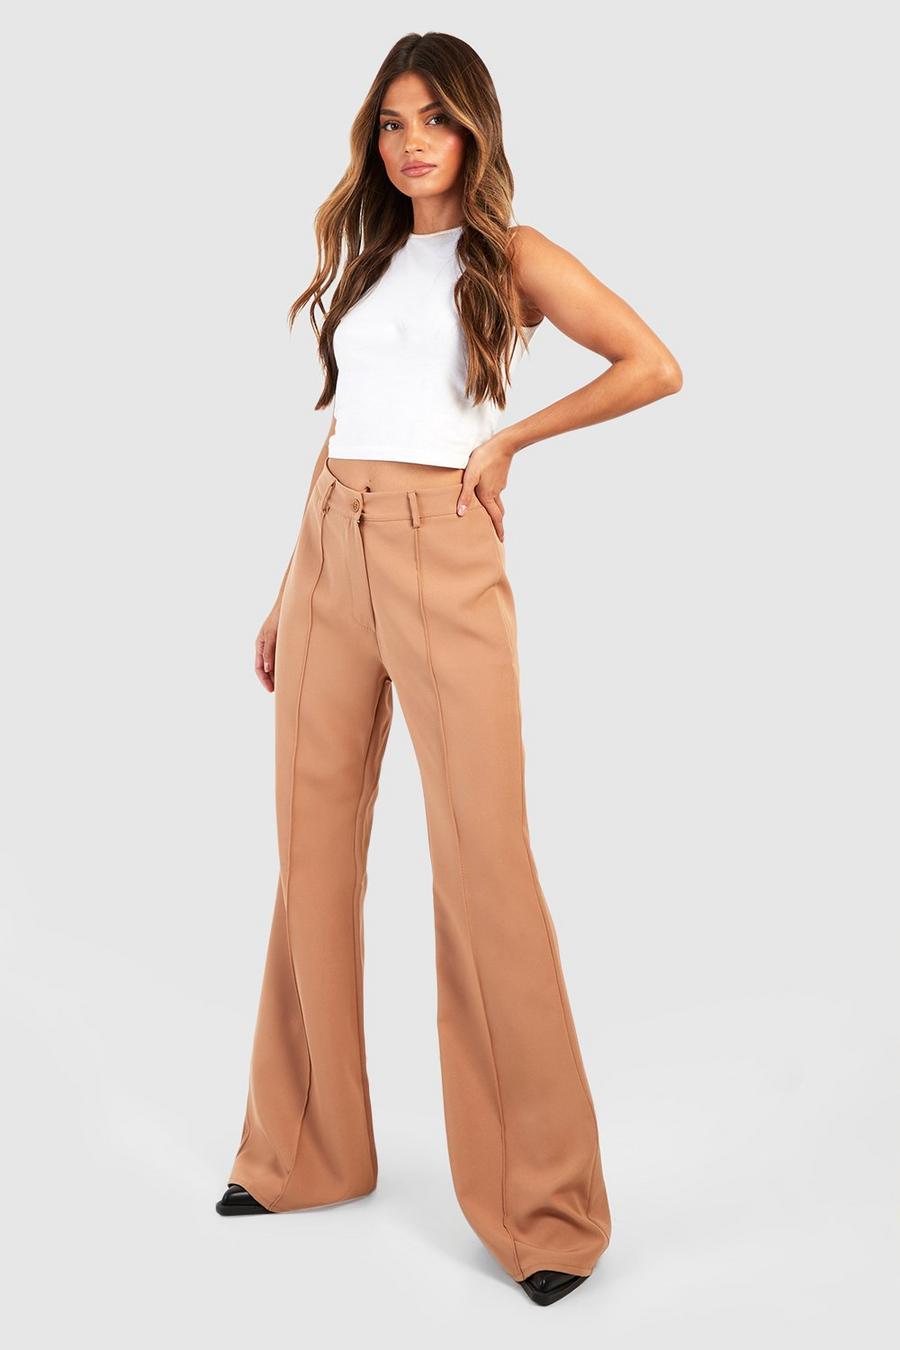 Woven Seam Detail Flare Pants